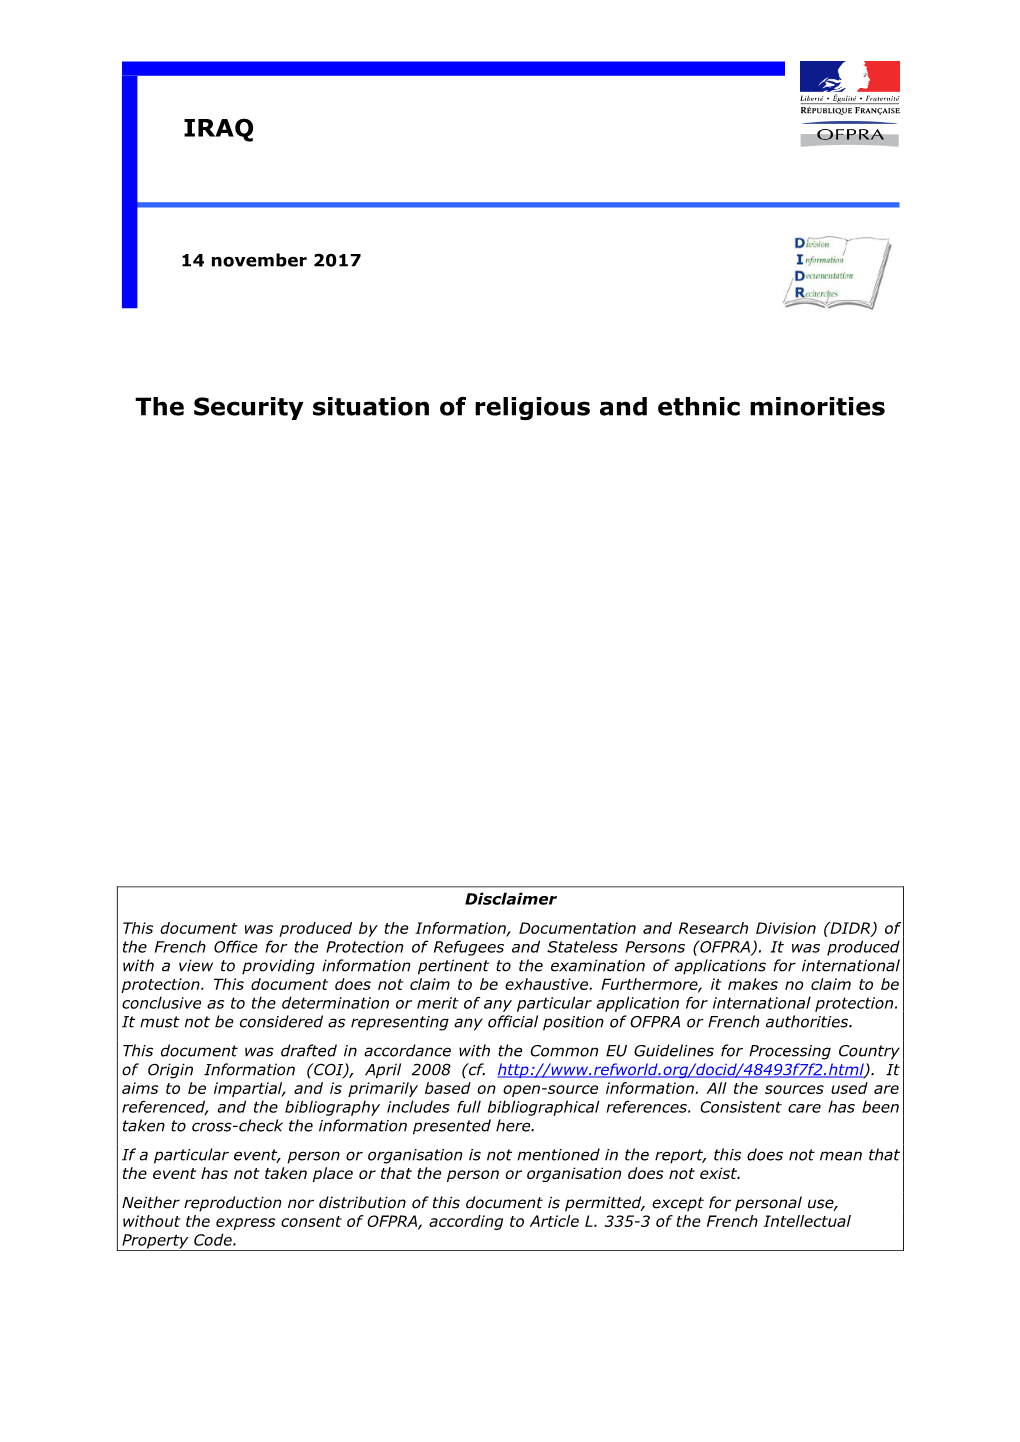 The Security Situation of Religious and Ethnic Minorities IRAQ